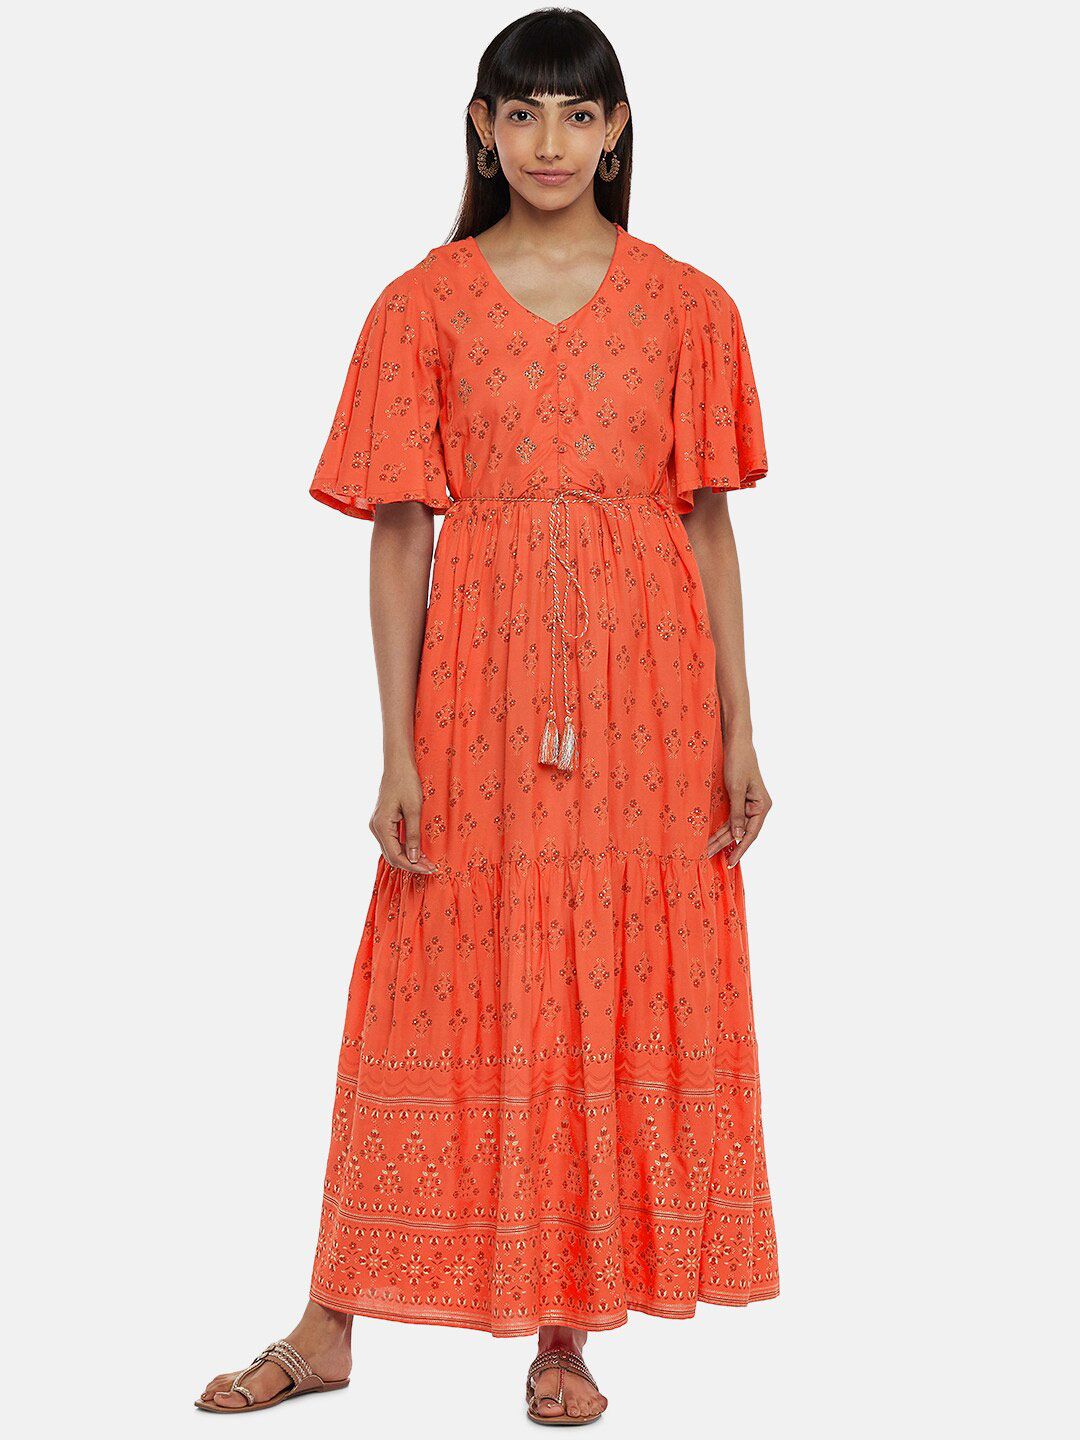 AKKRITI BY PANTALOONS Rust Floral Maxi Dress Price in India